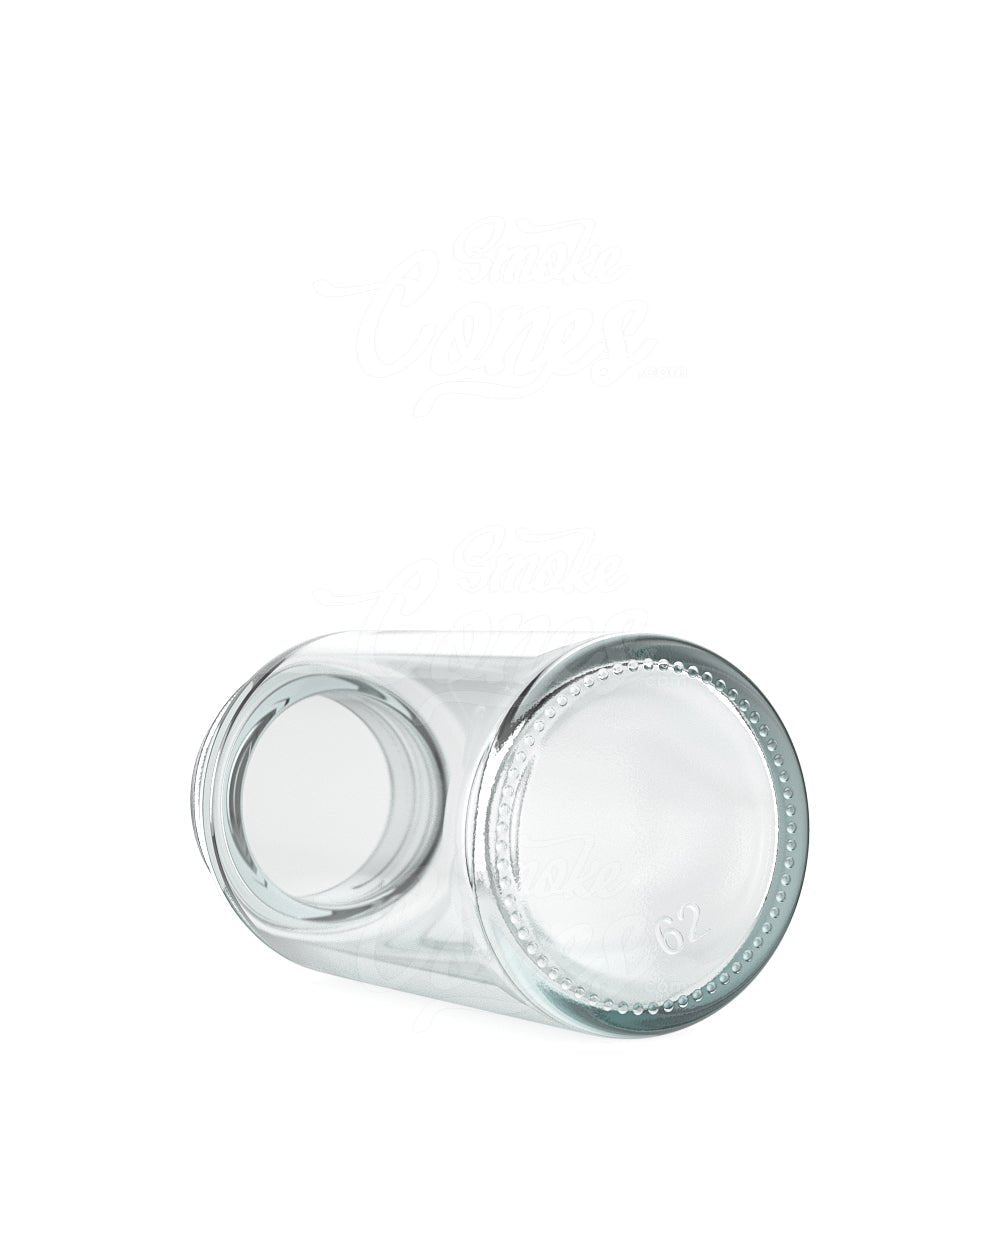 2oz Wide Mouth Straight Sided Glass Jars For Pre-Rolls